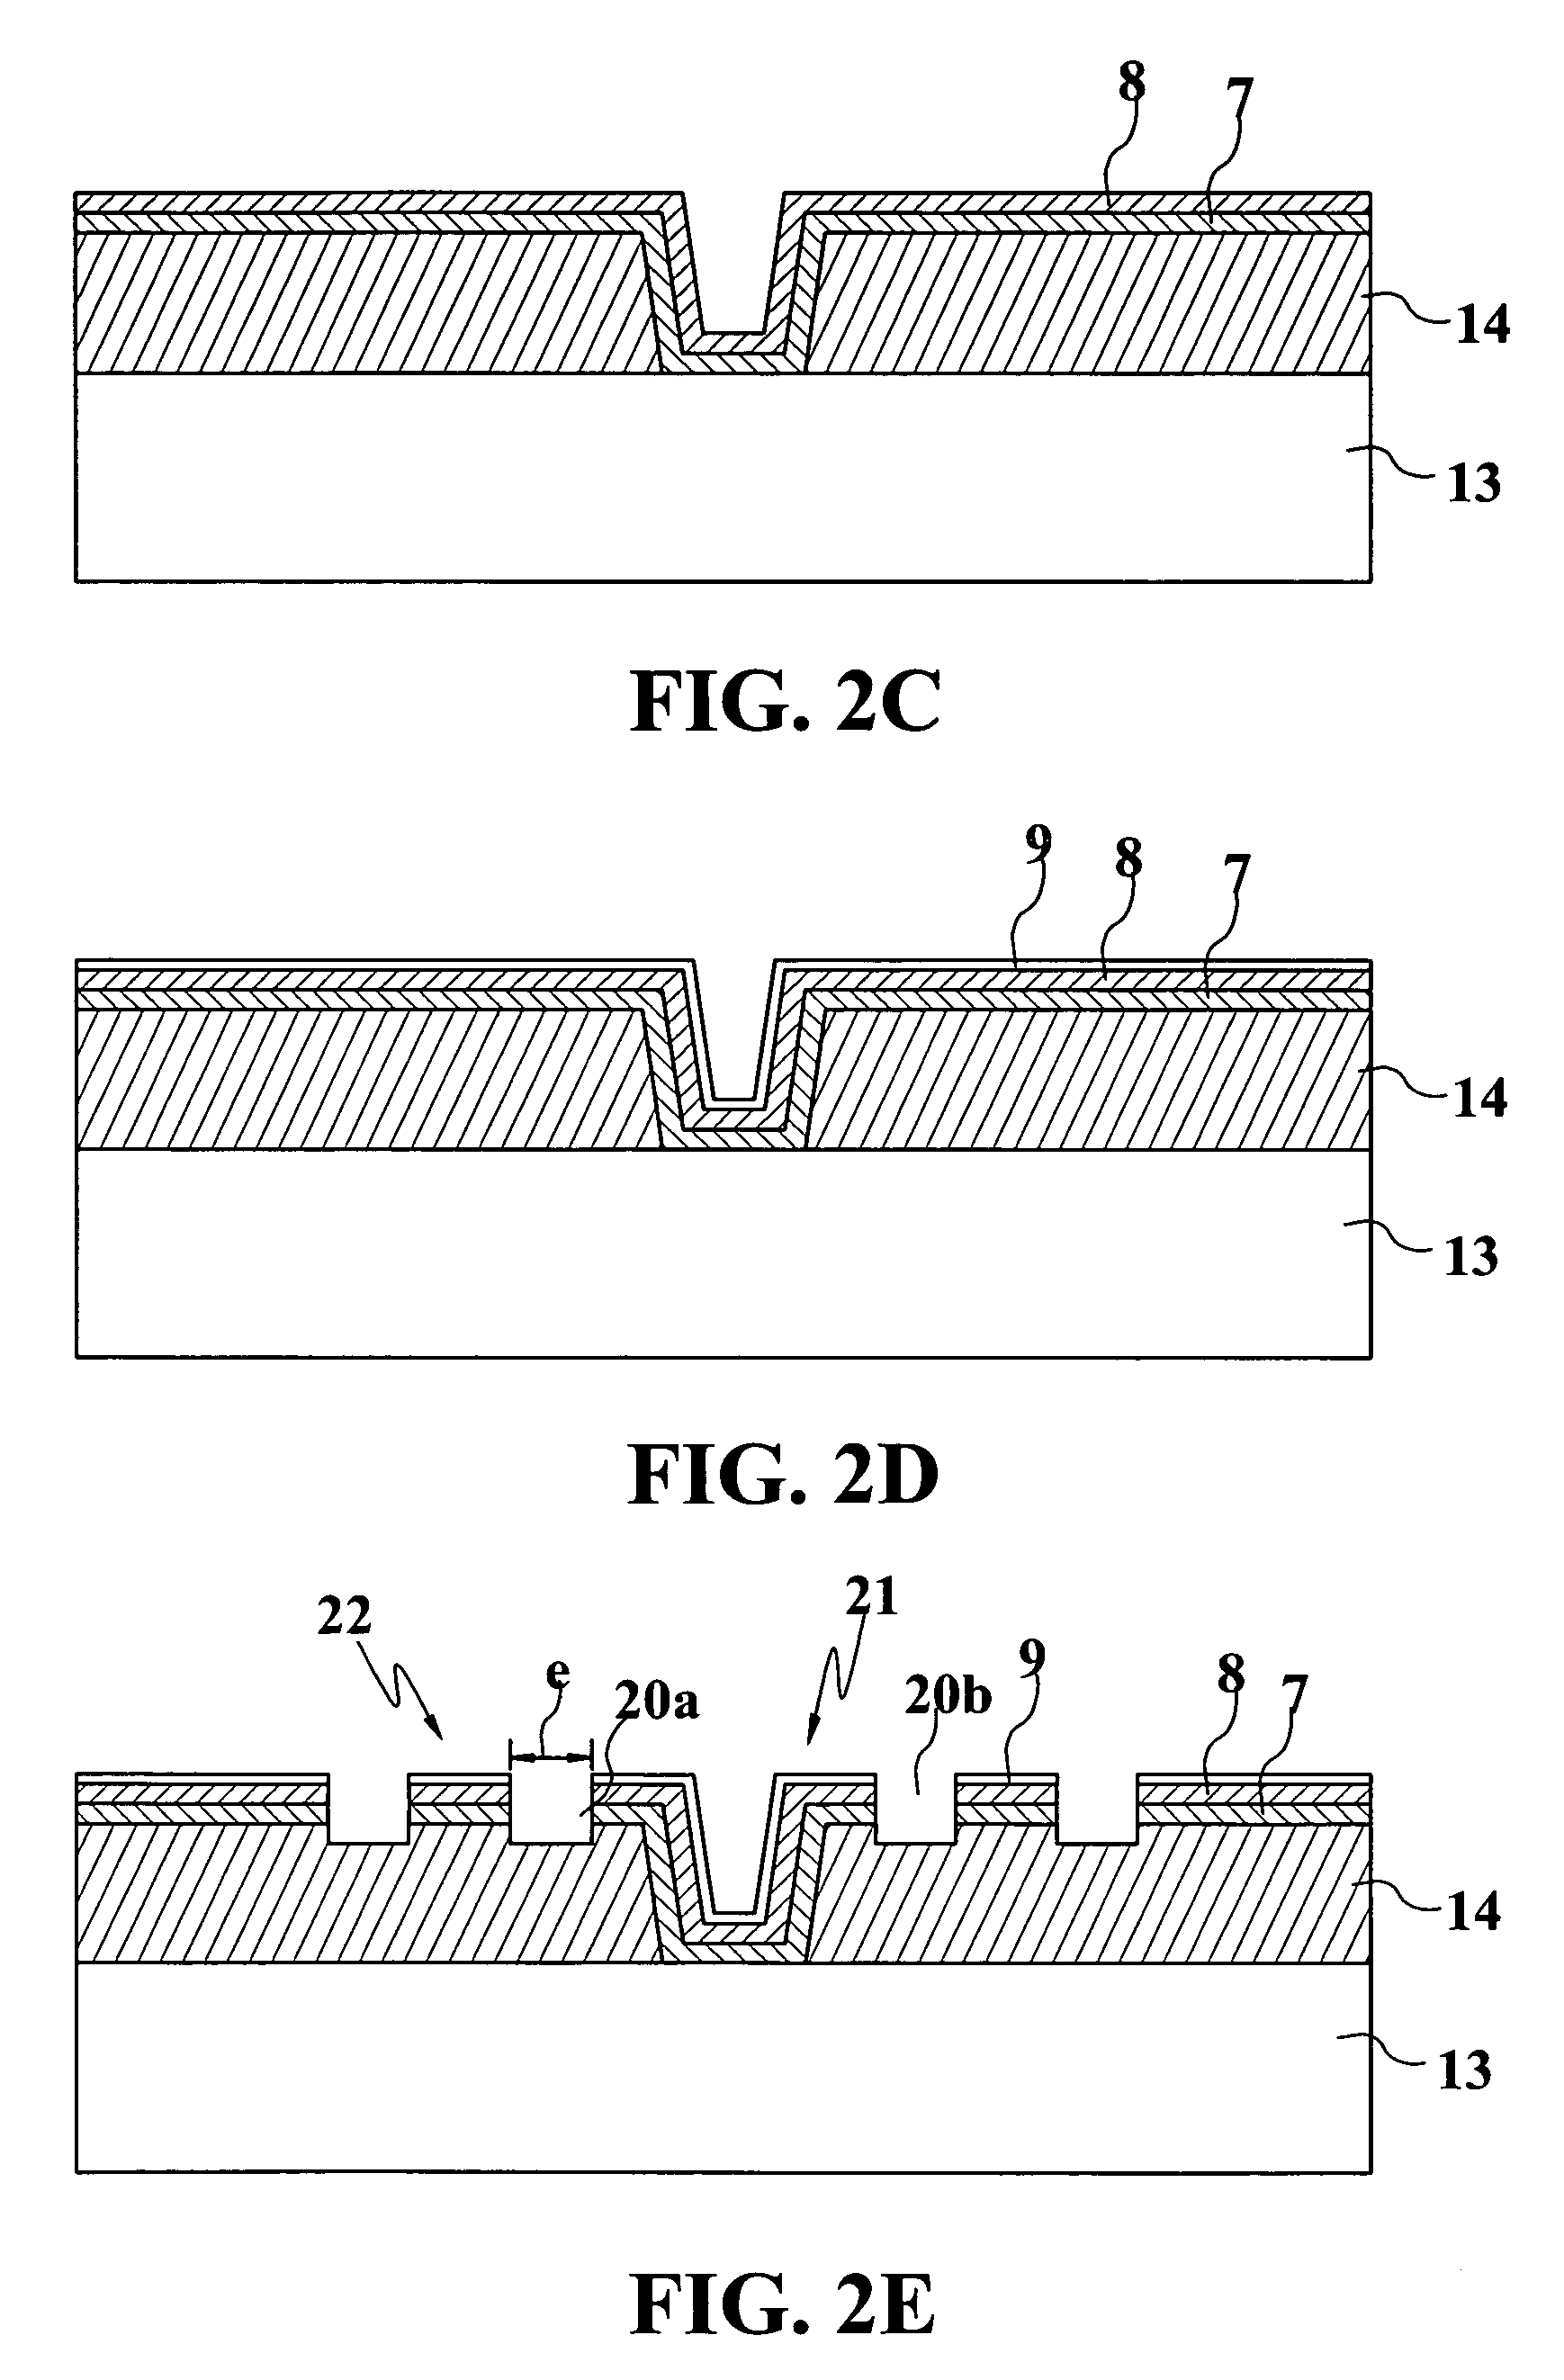 Micromirror array for projection TV